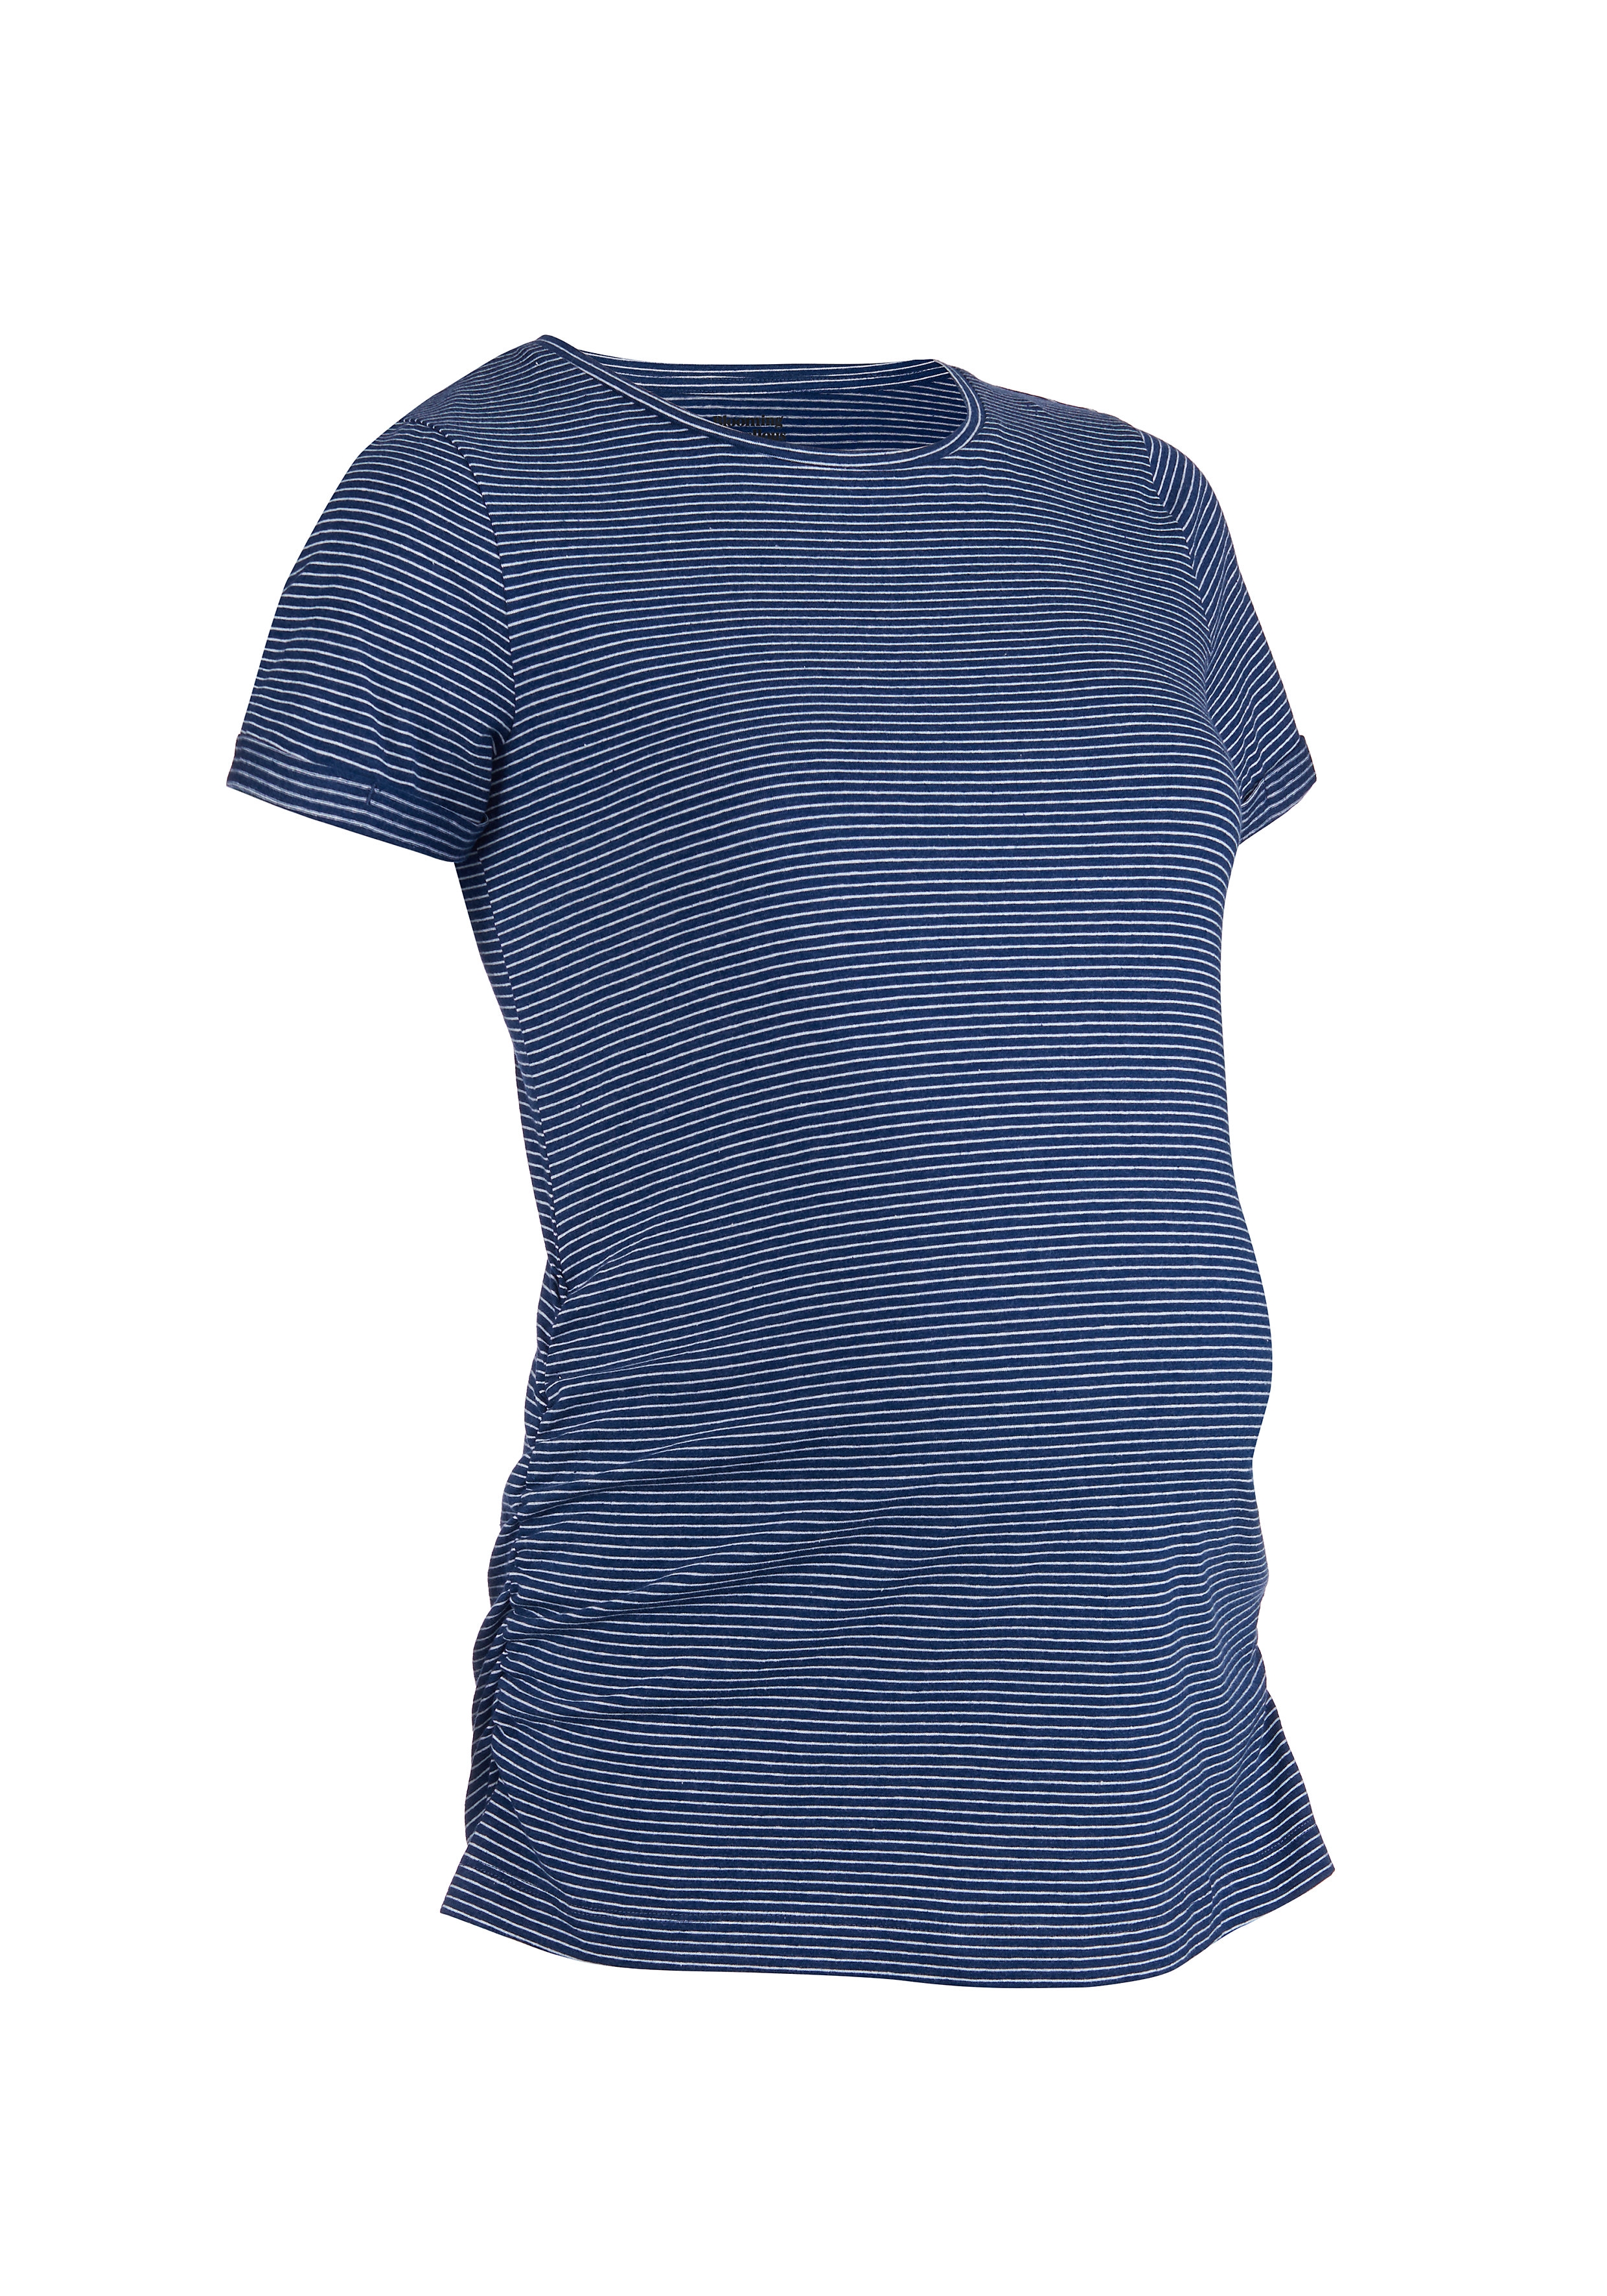 Mothercare | Women Half Sleeves T-Shirt Striped - Blue